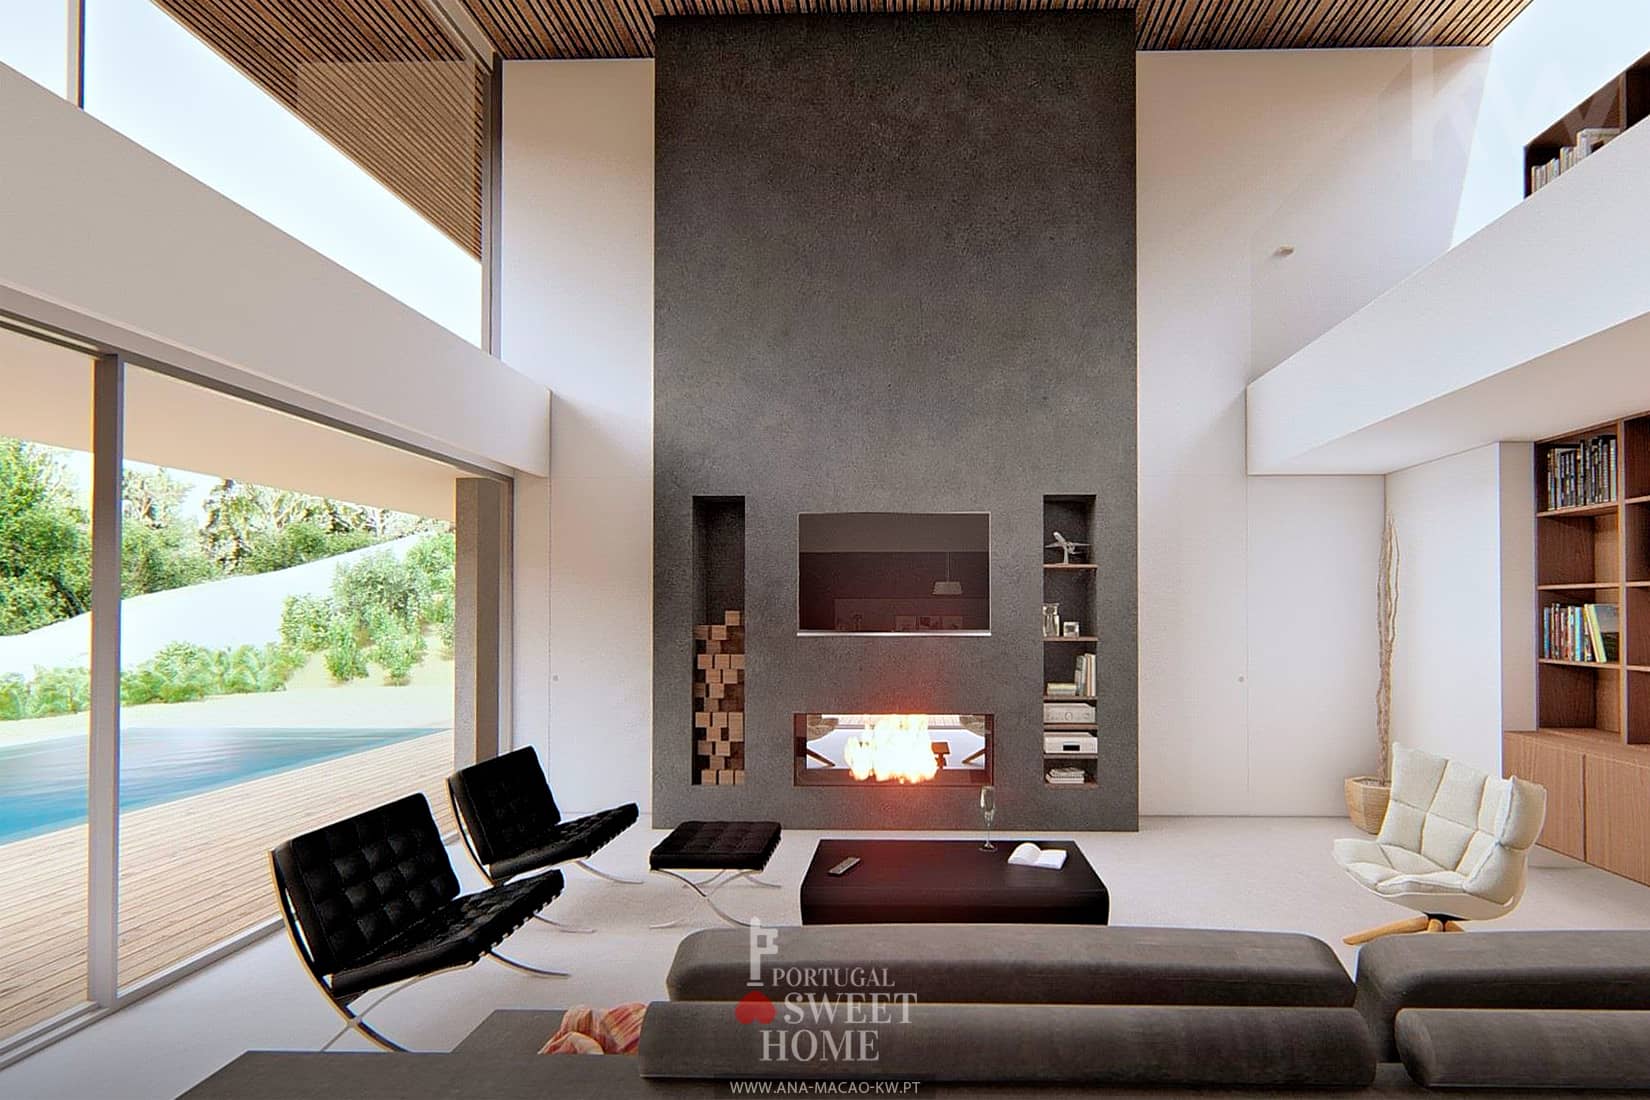 Main Living Room (63 m2) with fireplace